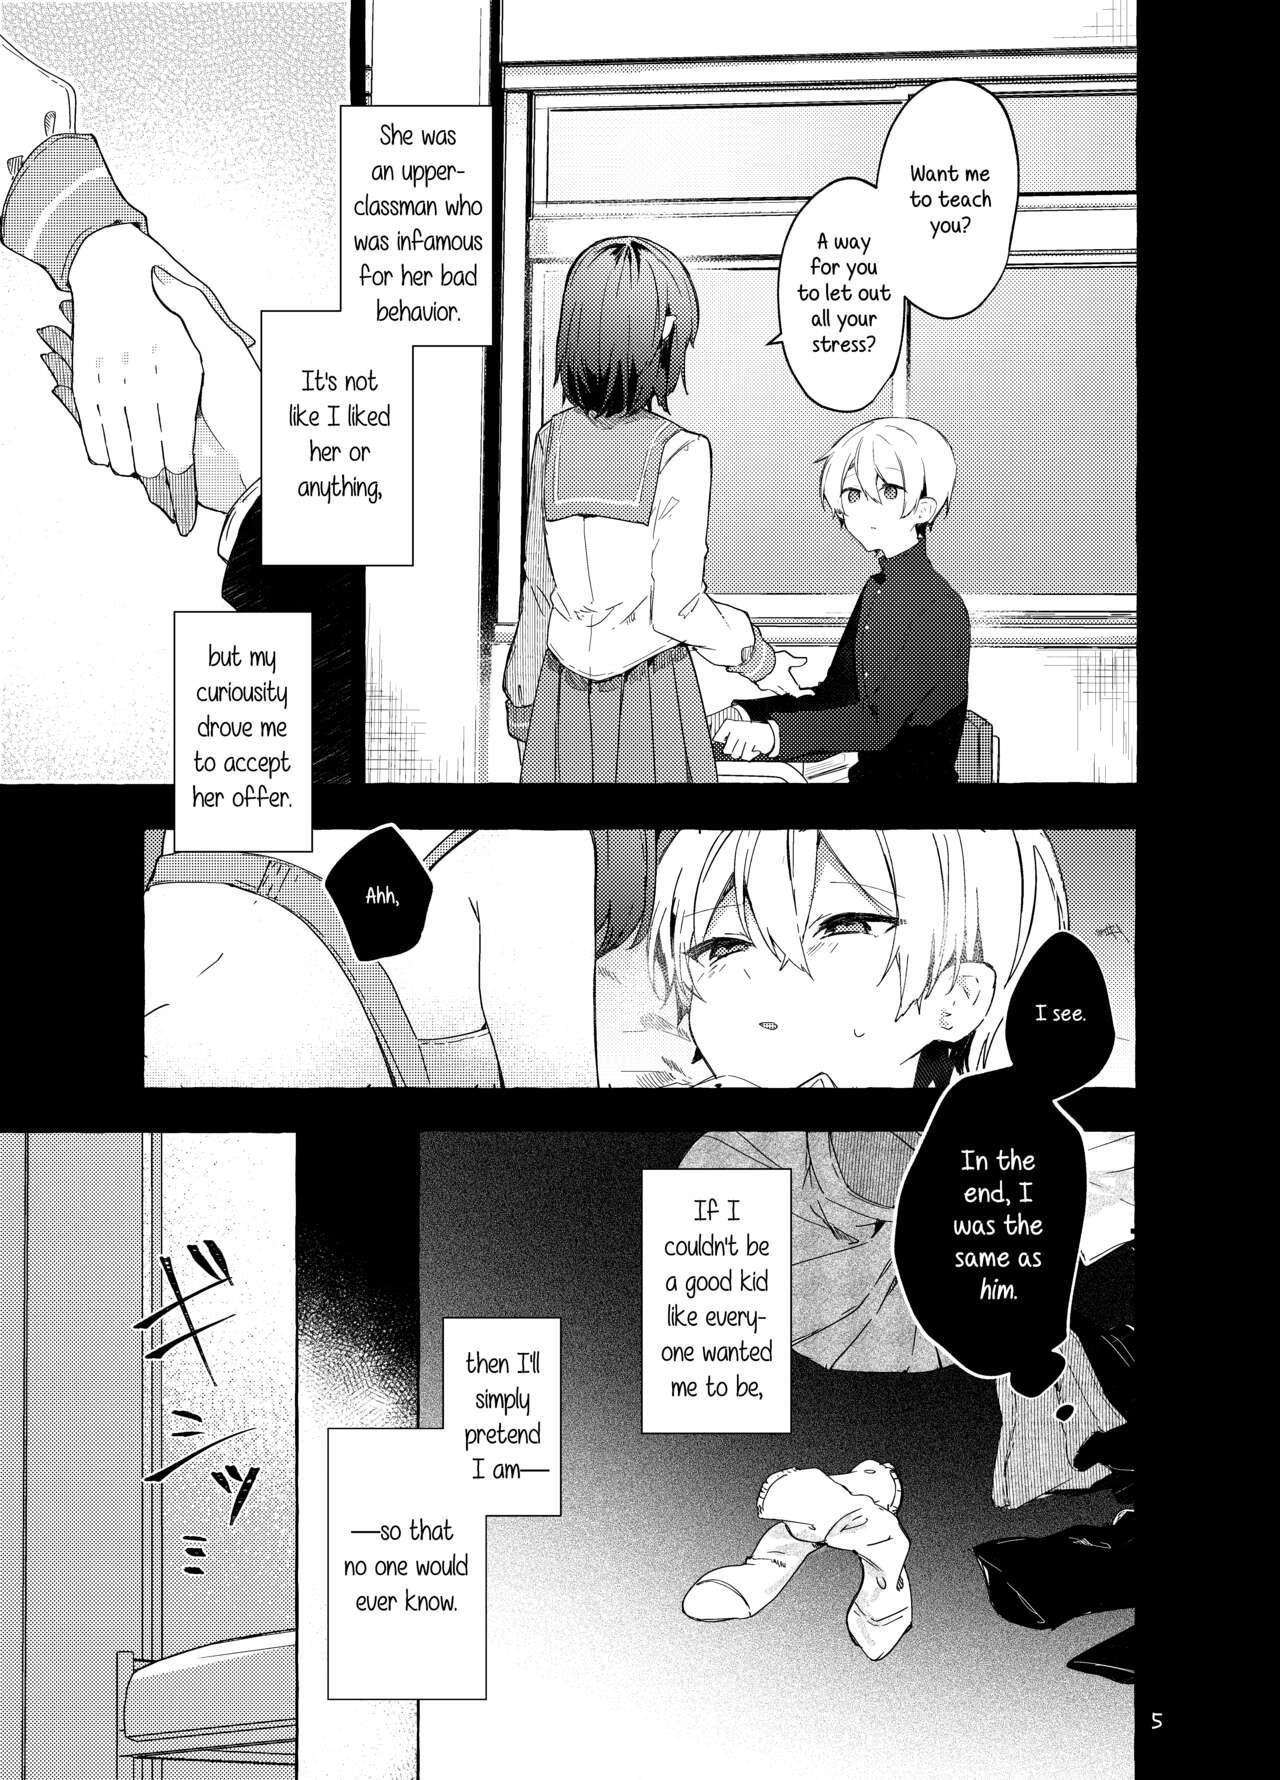 Swingers Kyou kara Waruiko. Zoku | I'll Be a Bad Kid From Now On. 2 - Original Young Tits - Page 6